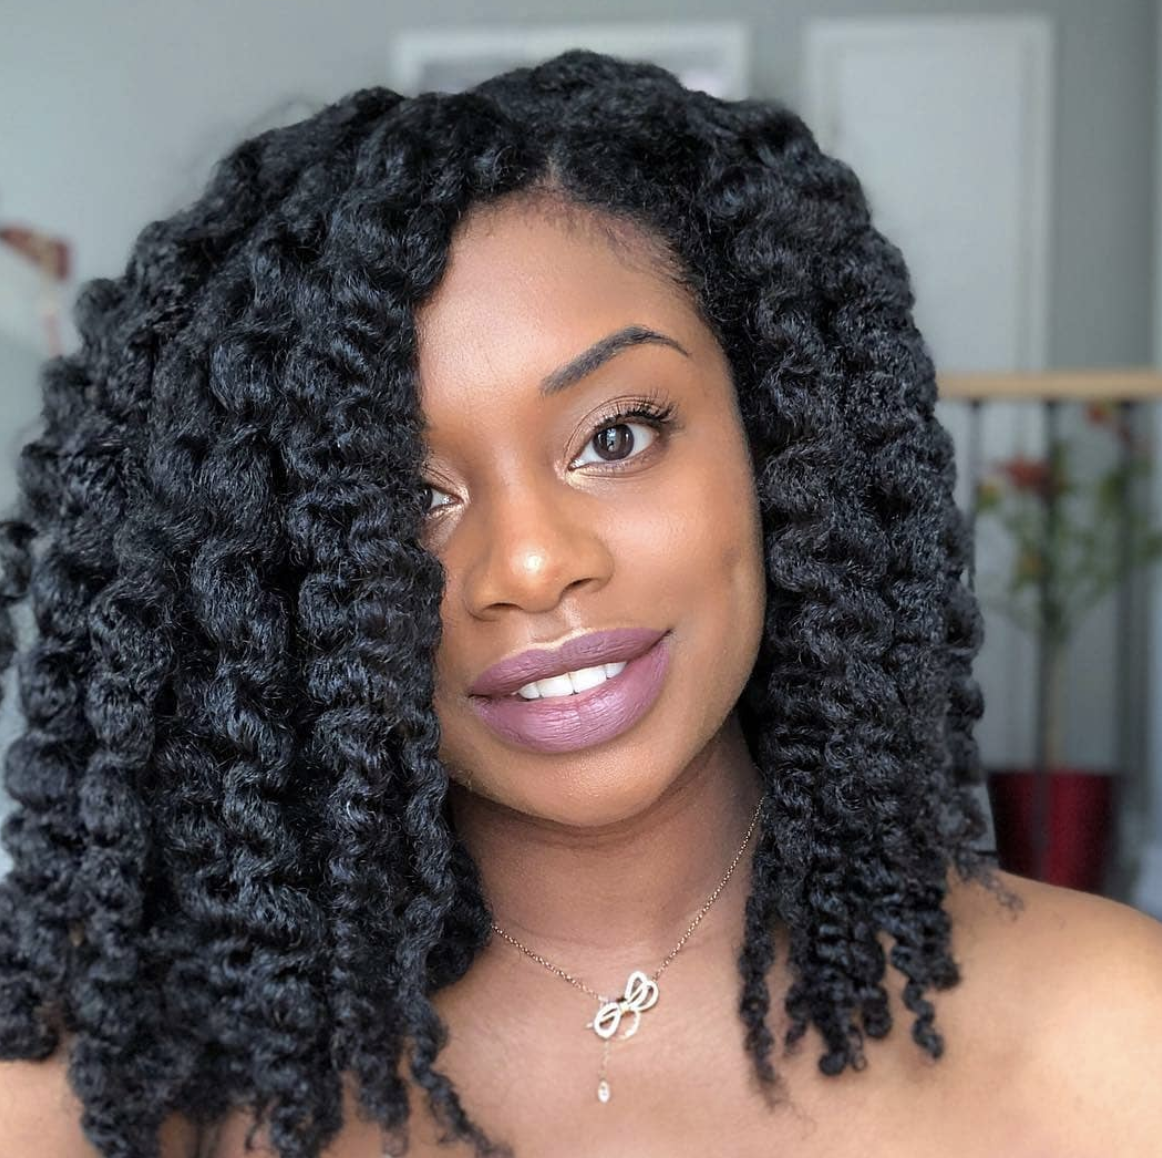 Simple Afro Tutorial On Medium Length 4c Natural Hair + Half Up Half Down  Style With Side Twists 